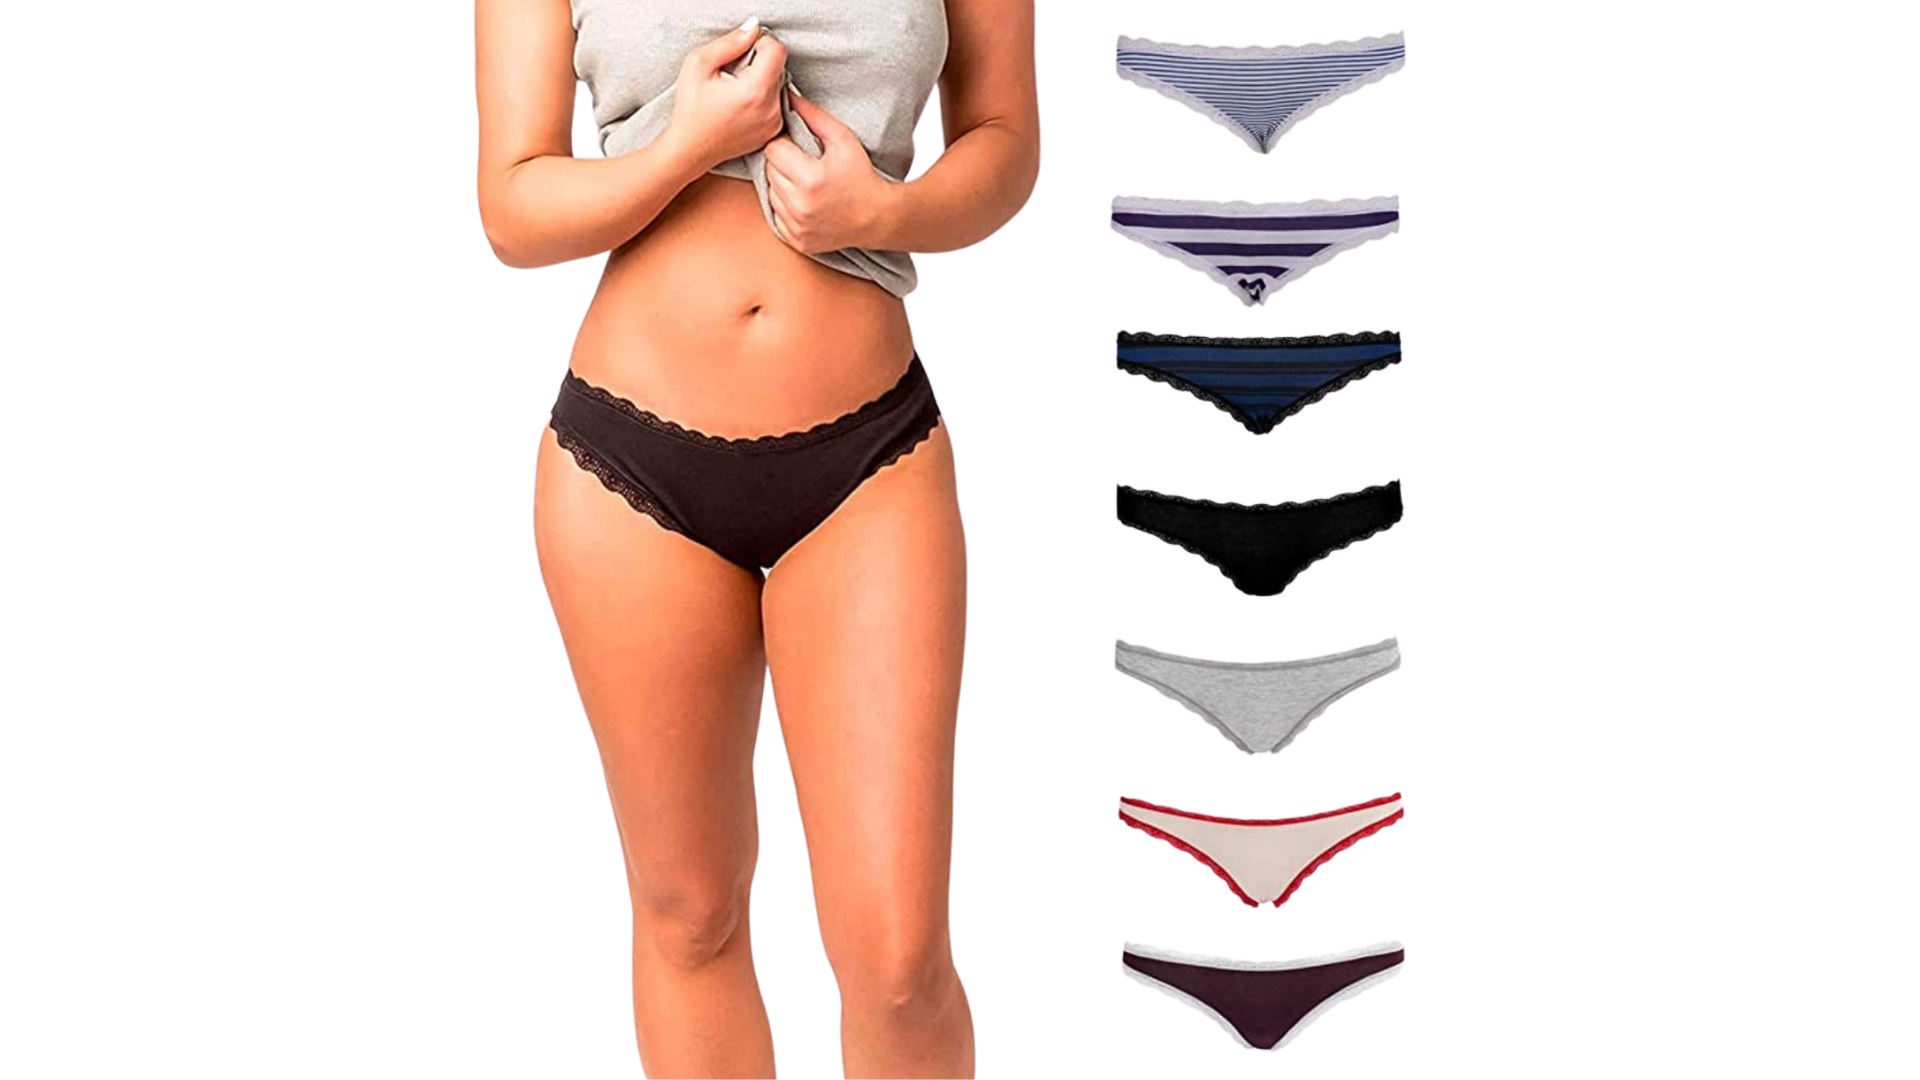  Fruit Of The Loom Womens Underwear Moisture Wicking Coolblend  Panties, Hi-Cut - Fashion Assorted, Small